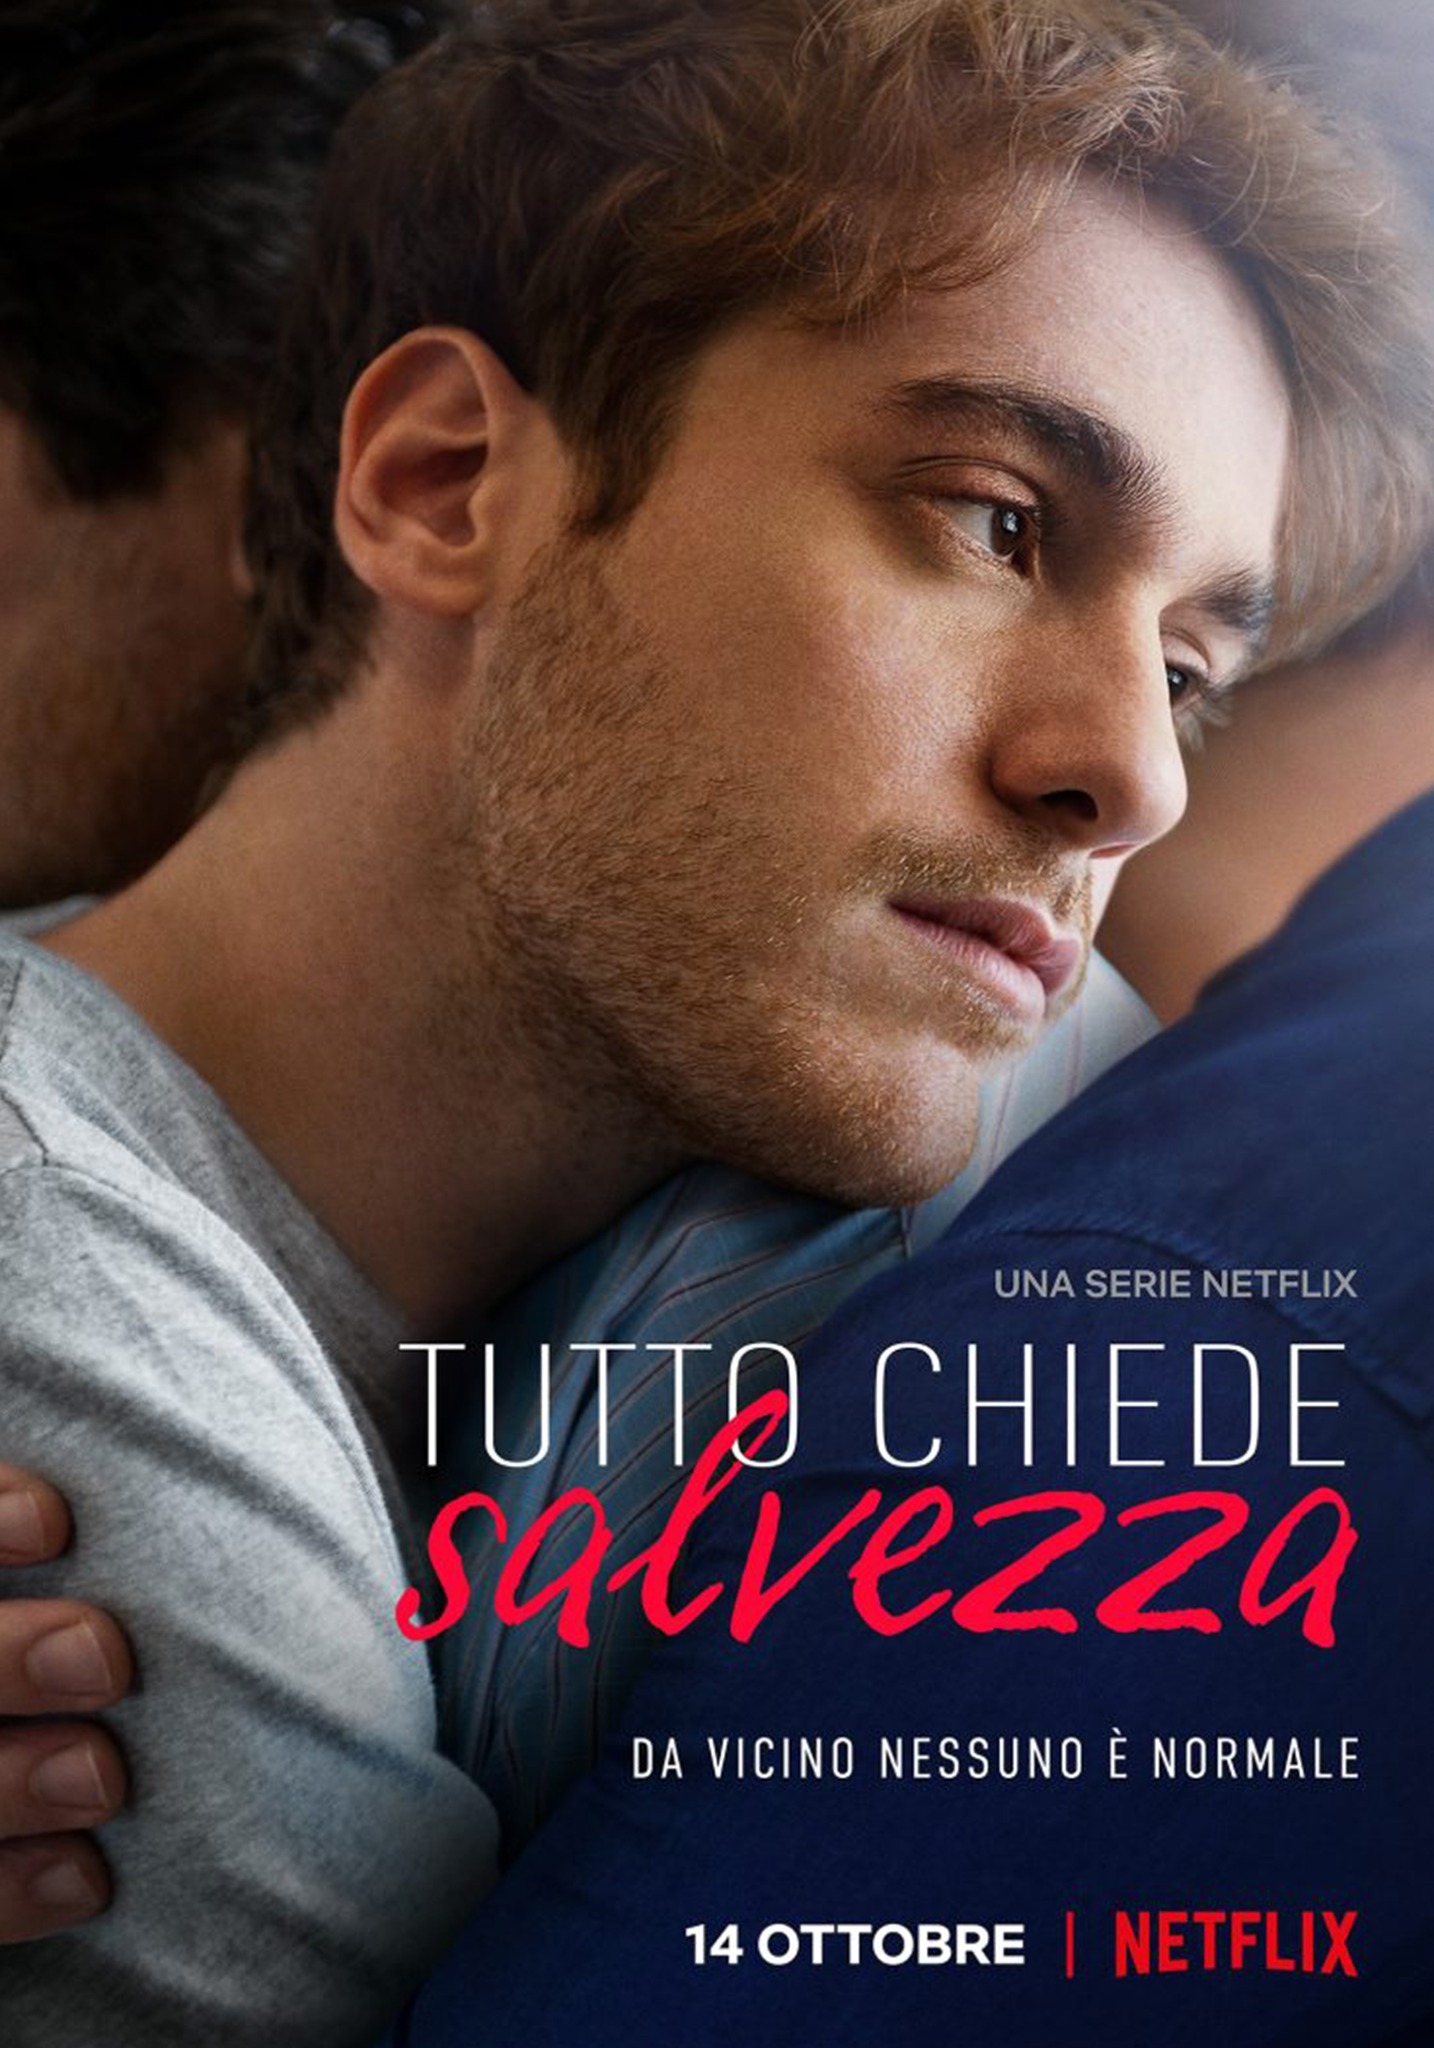 Mega Sized TV Poster Image for Tutto chiede salvezza 